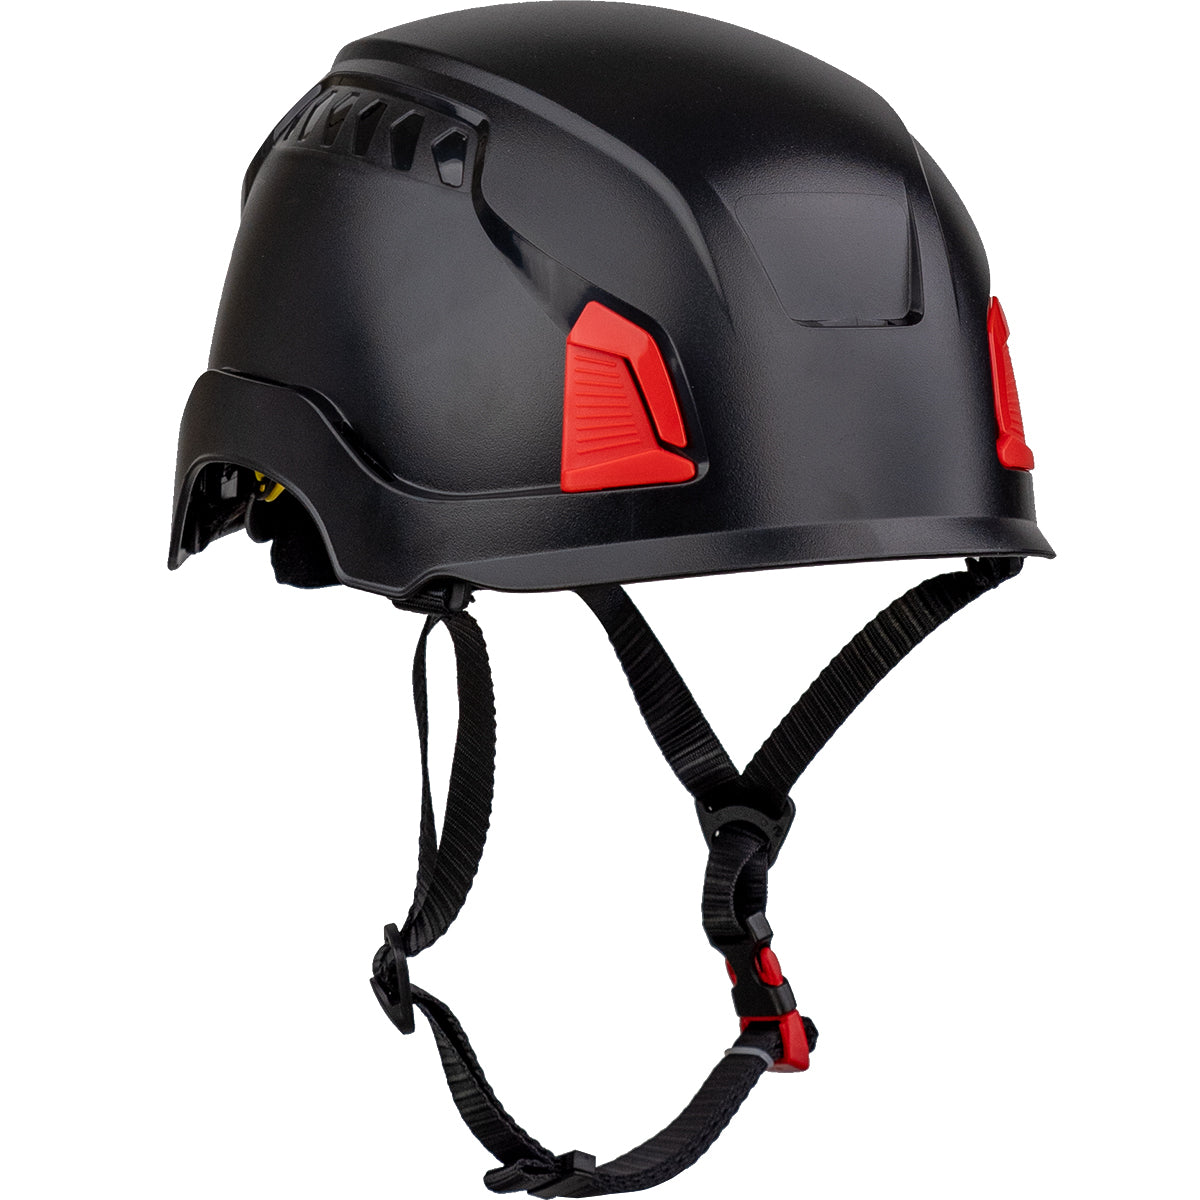 Traverse™ Industrial Climbing Helmet with Mips® Technology, ABS Shell, EPS Foam Impact Liner, HDPE Suspension, Wheel Ratchet Adjustment and 4-Point Chin Strap